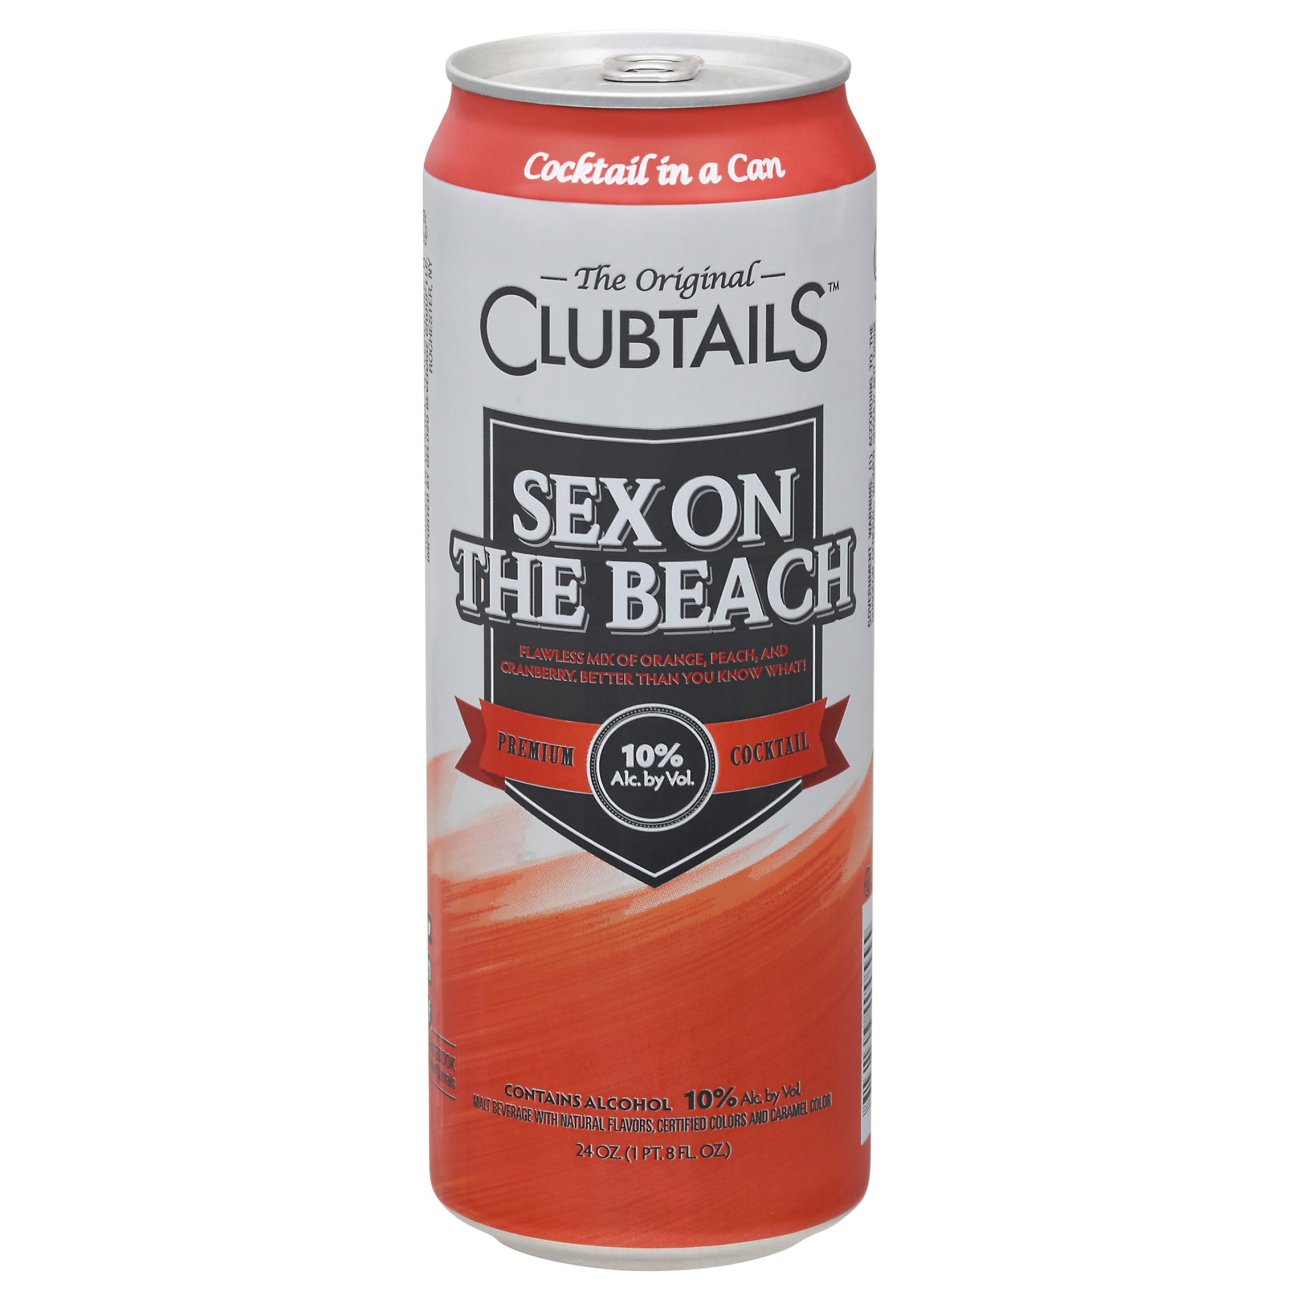 Clubtails Sex On The Beach Premium Cocktail Shop Malt Beverages And Coolers At H E B